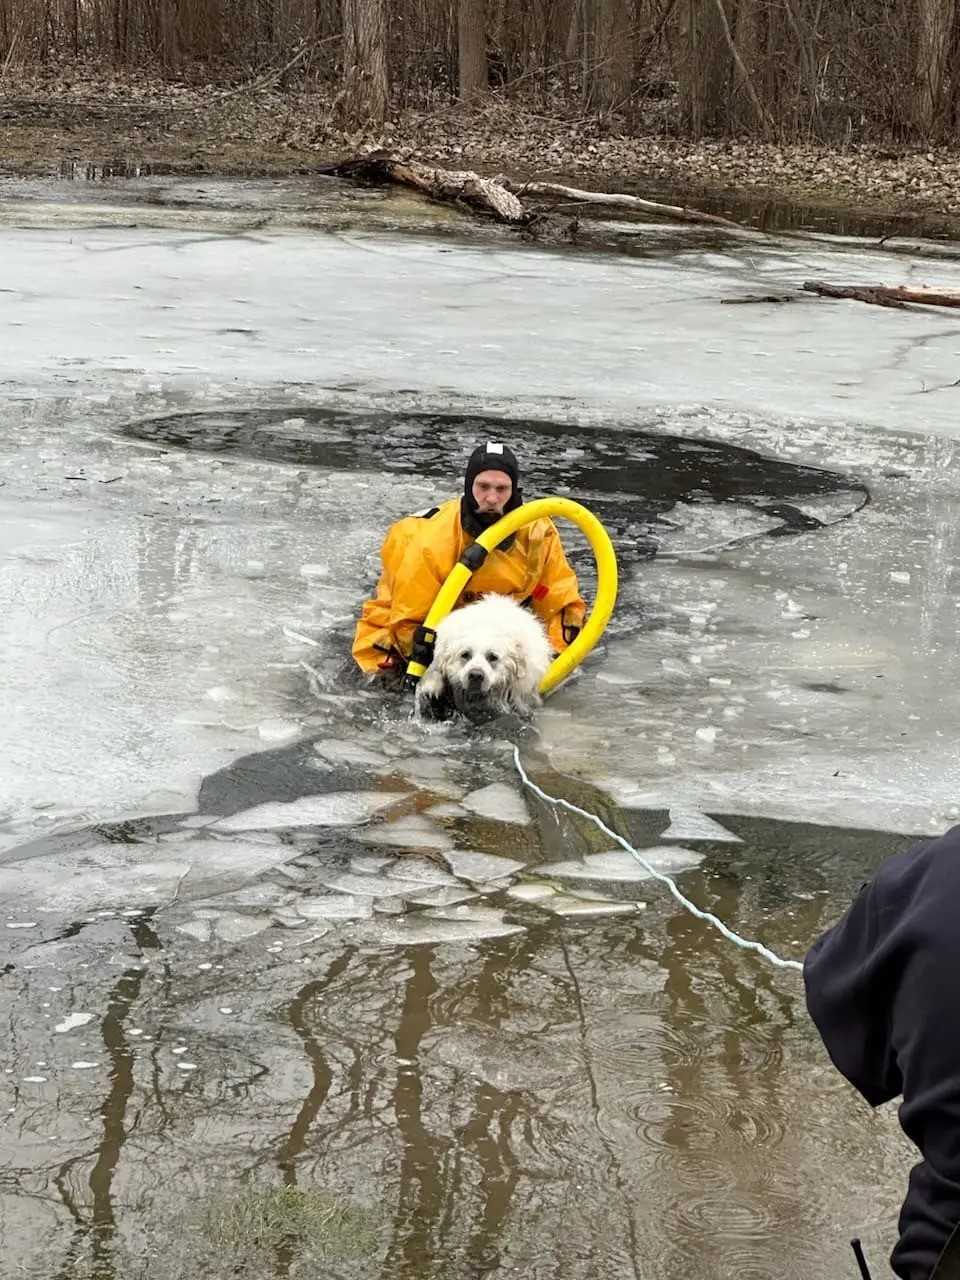 Giant Pup Saved from Icy Pond by Quick-Thinking Firefighters